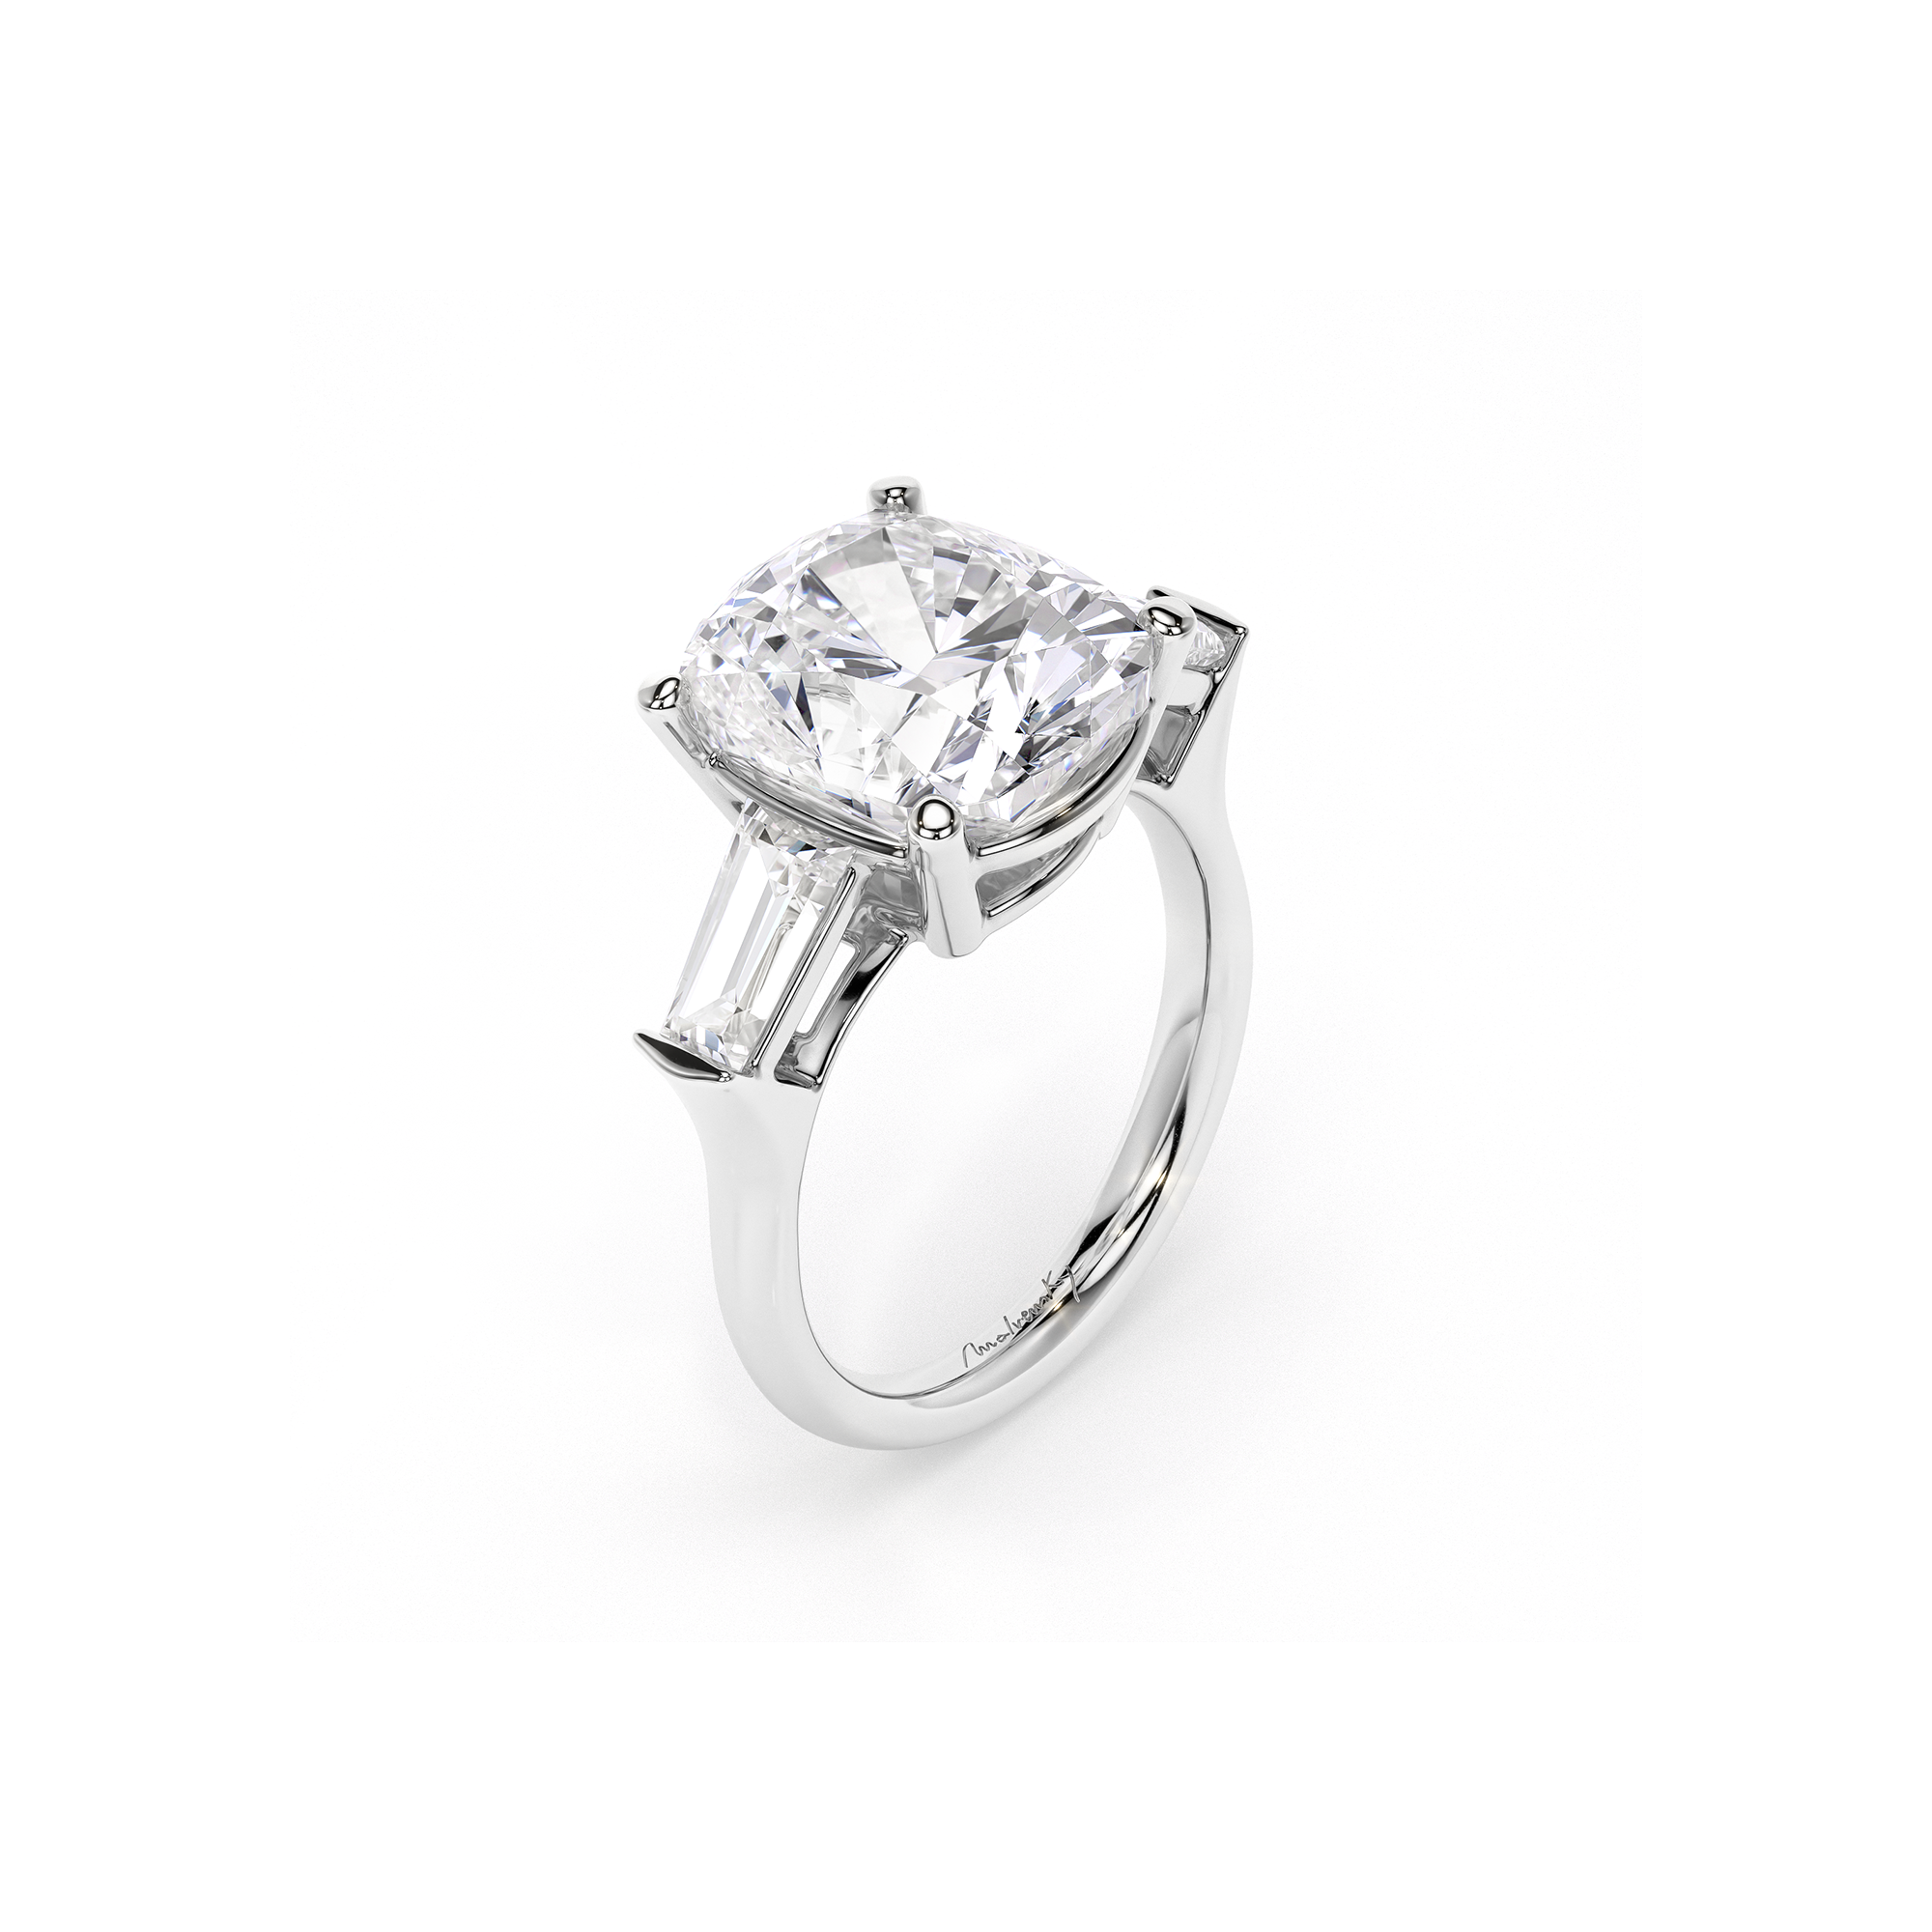 18 KT White Gold Trilogy Engagement Ring Cushion Cut 5.00 CT